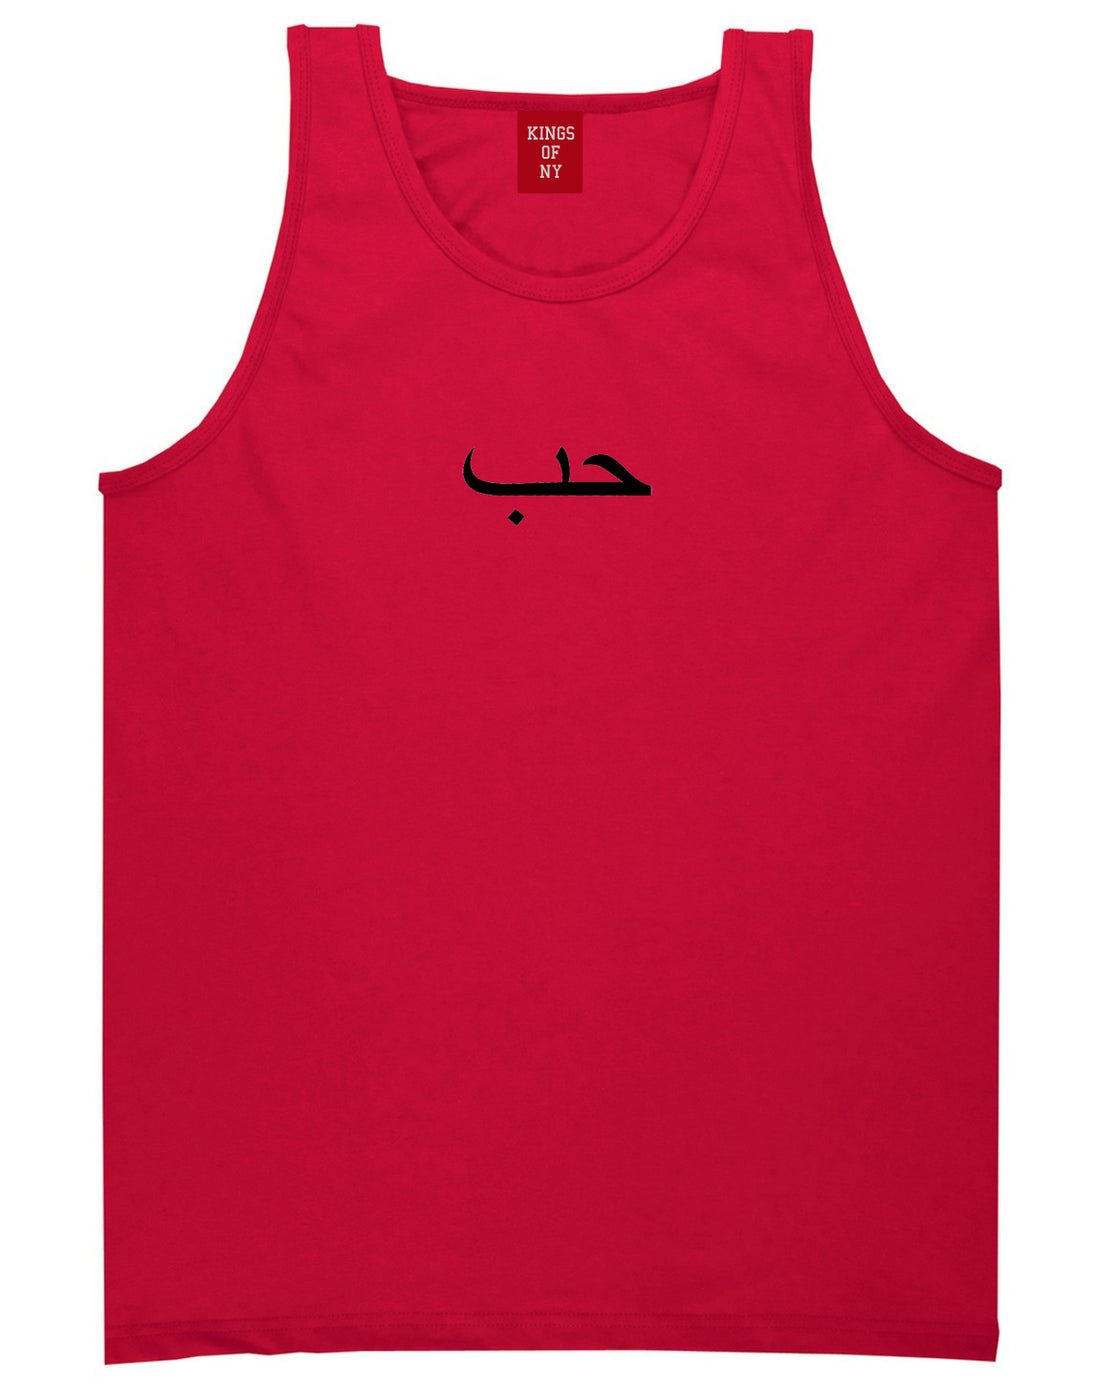 Arabic Love Mens Tank Top Shirt Red by Kings Of NY